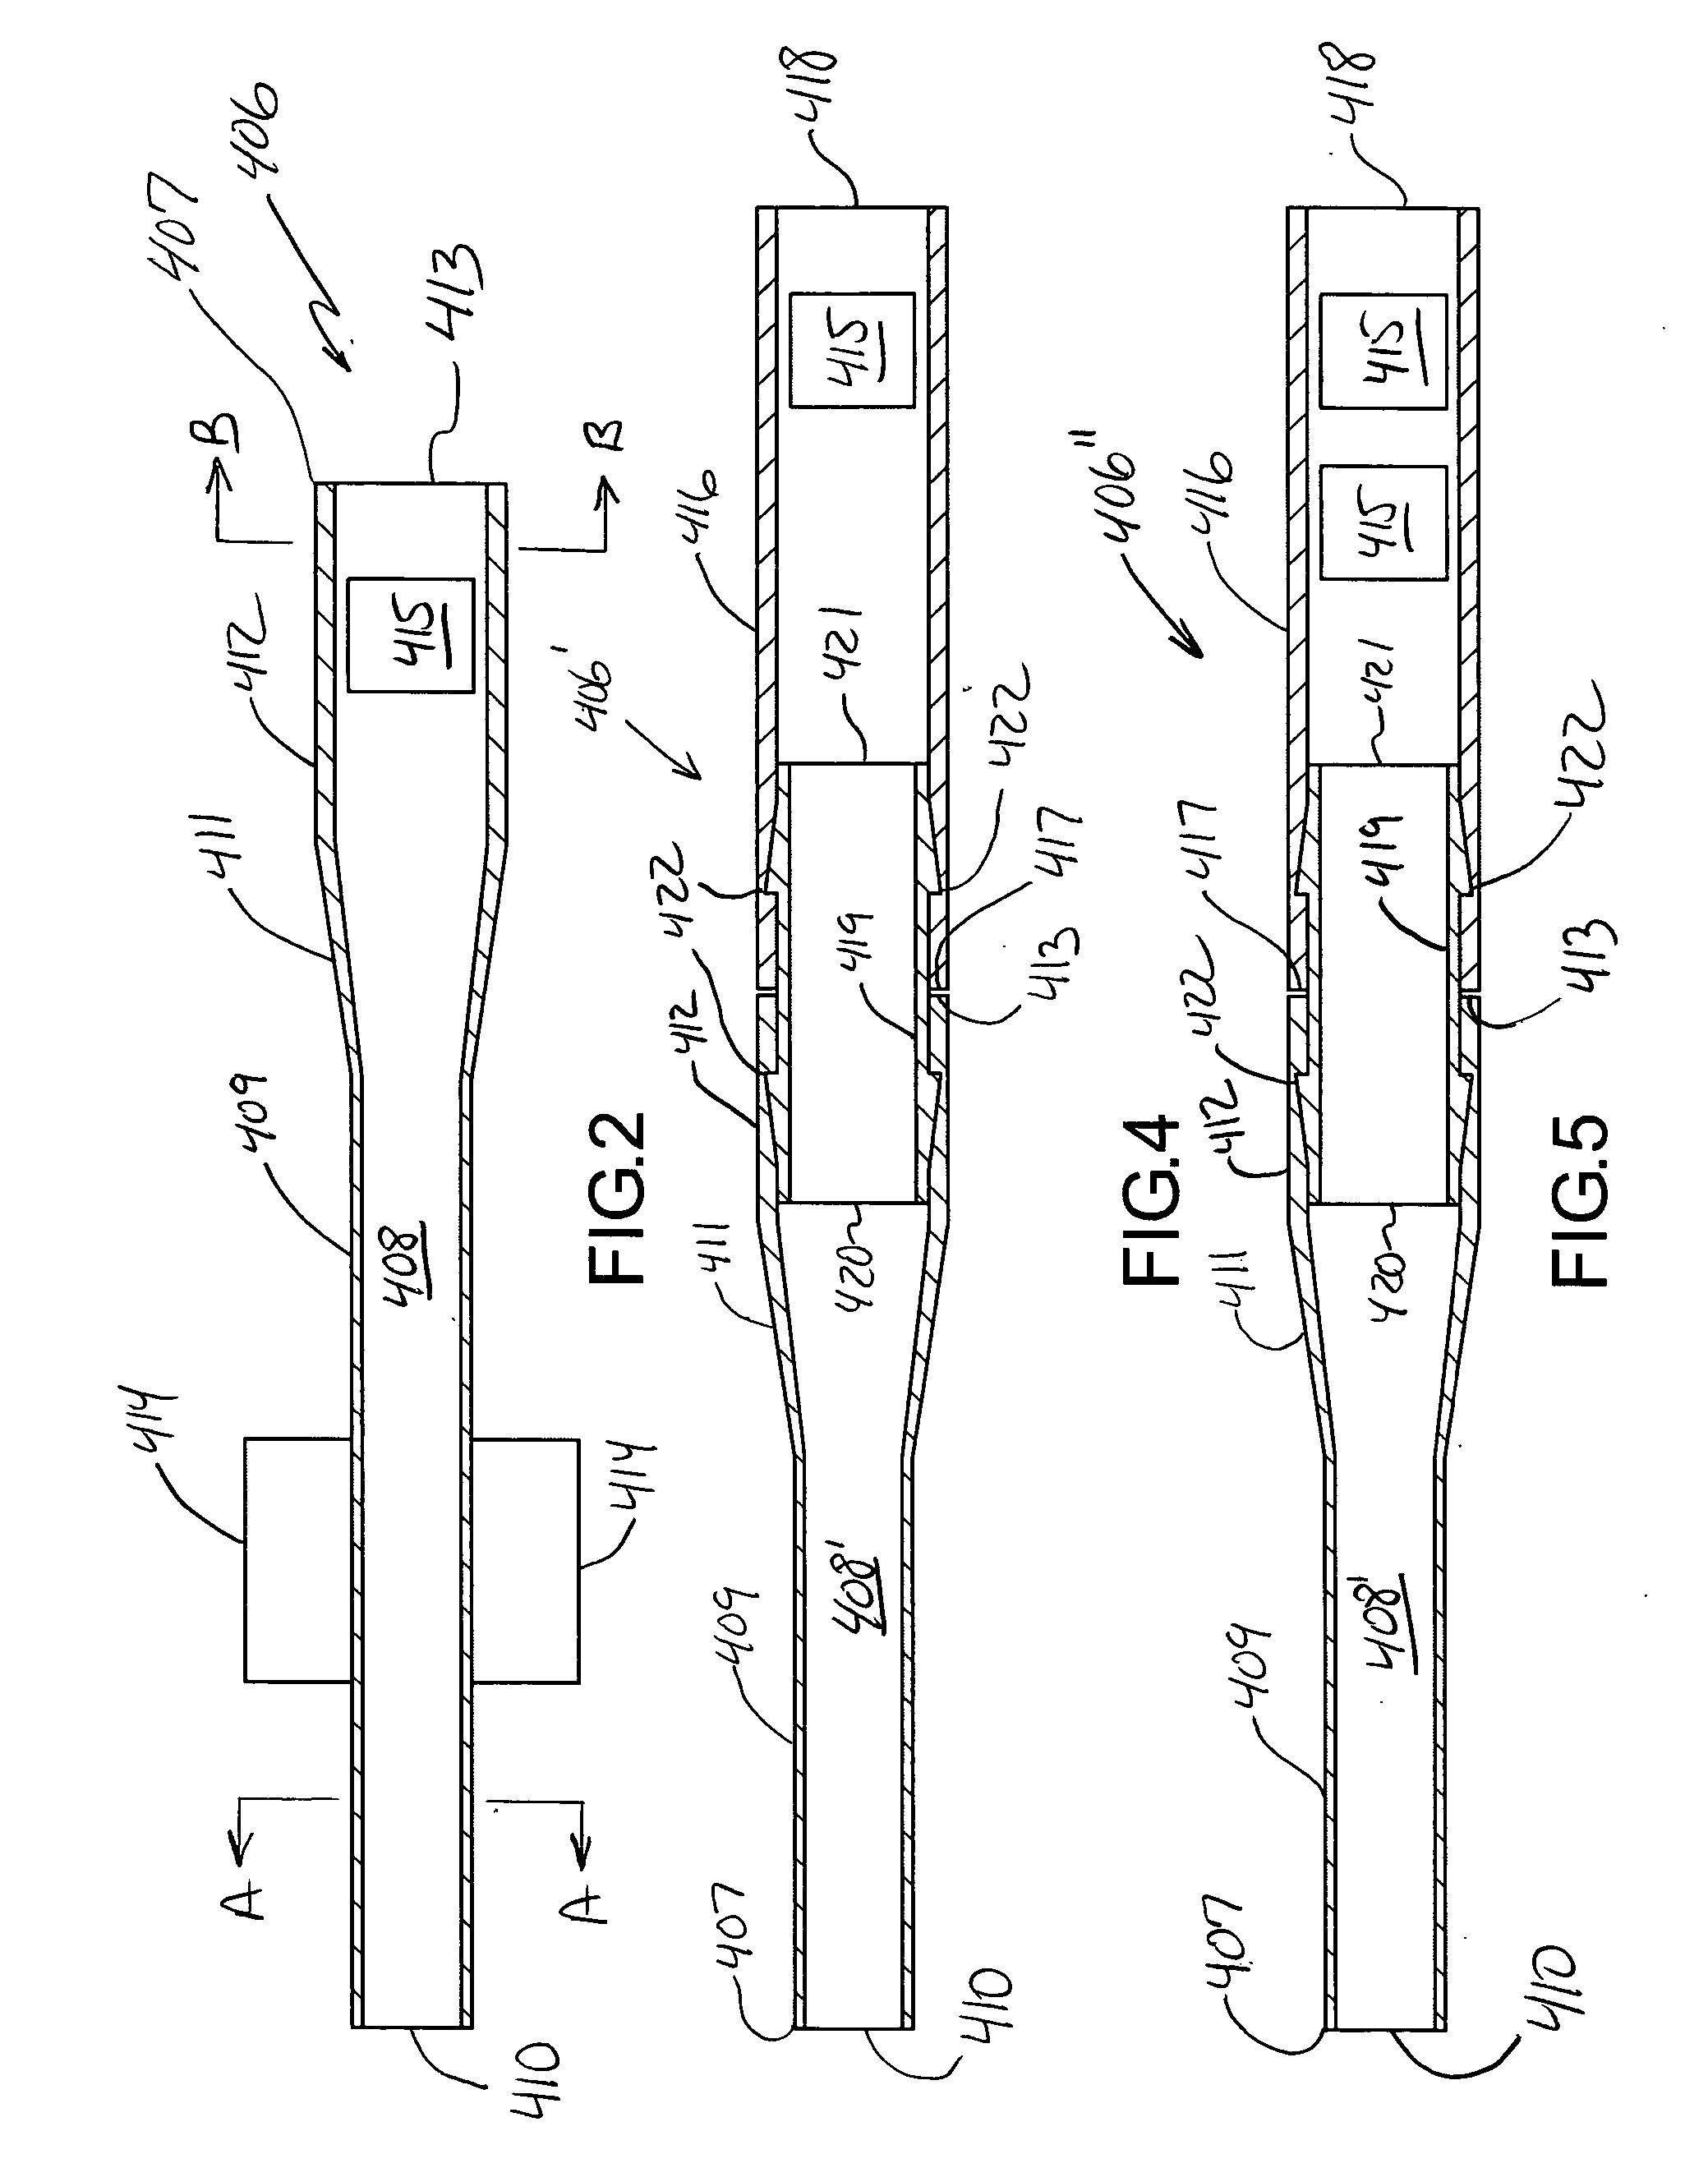 System and method for treating glaucoma